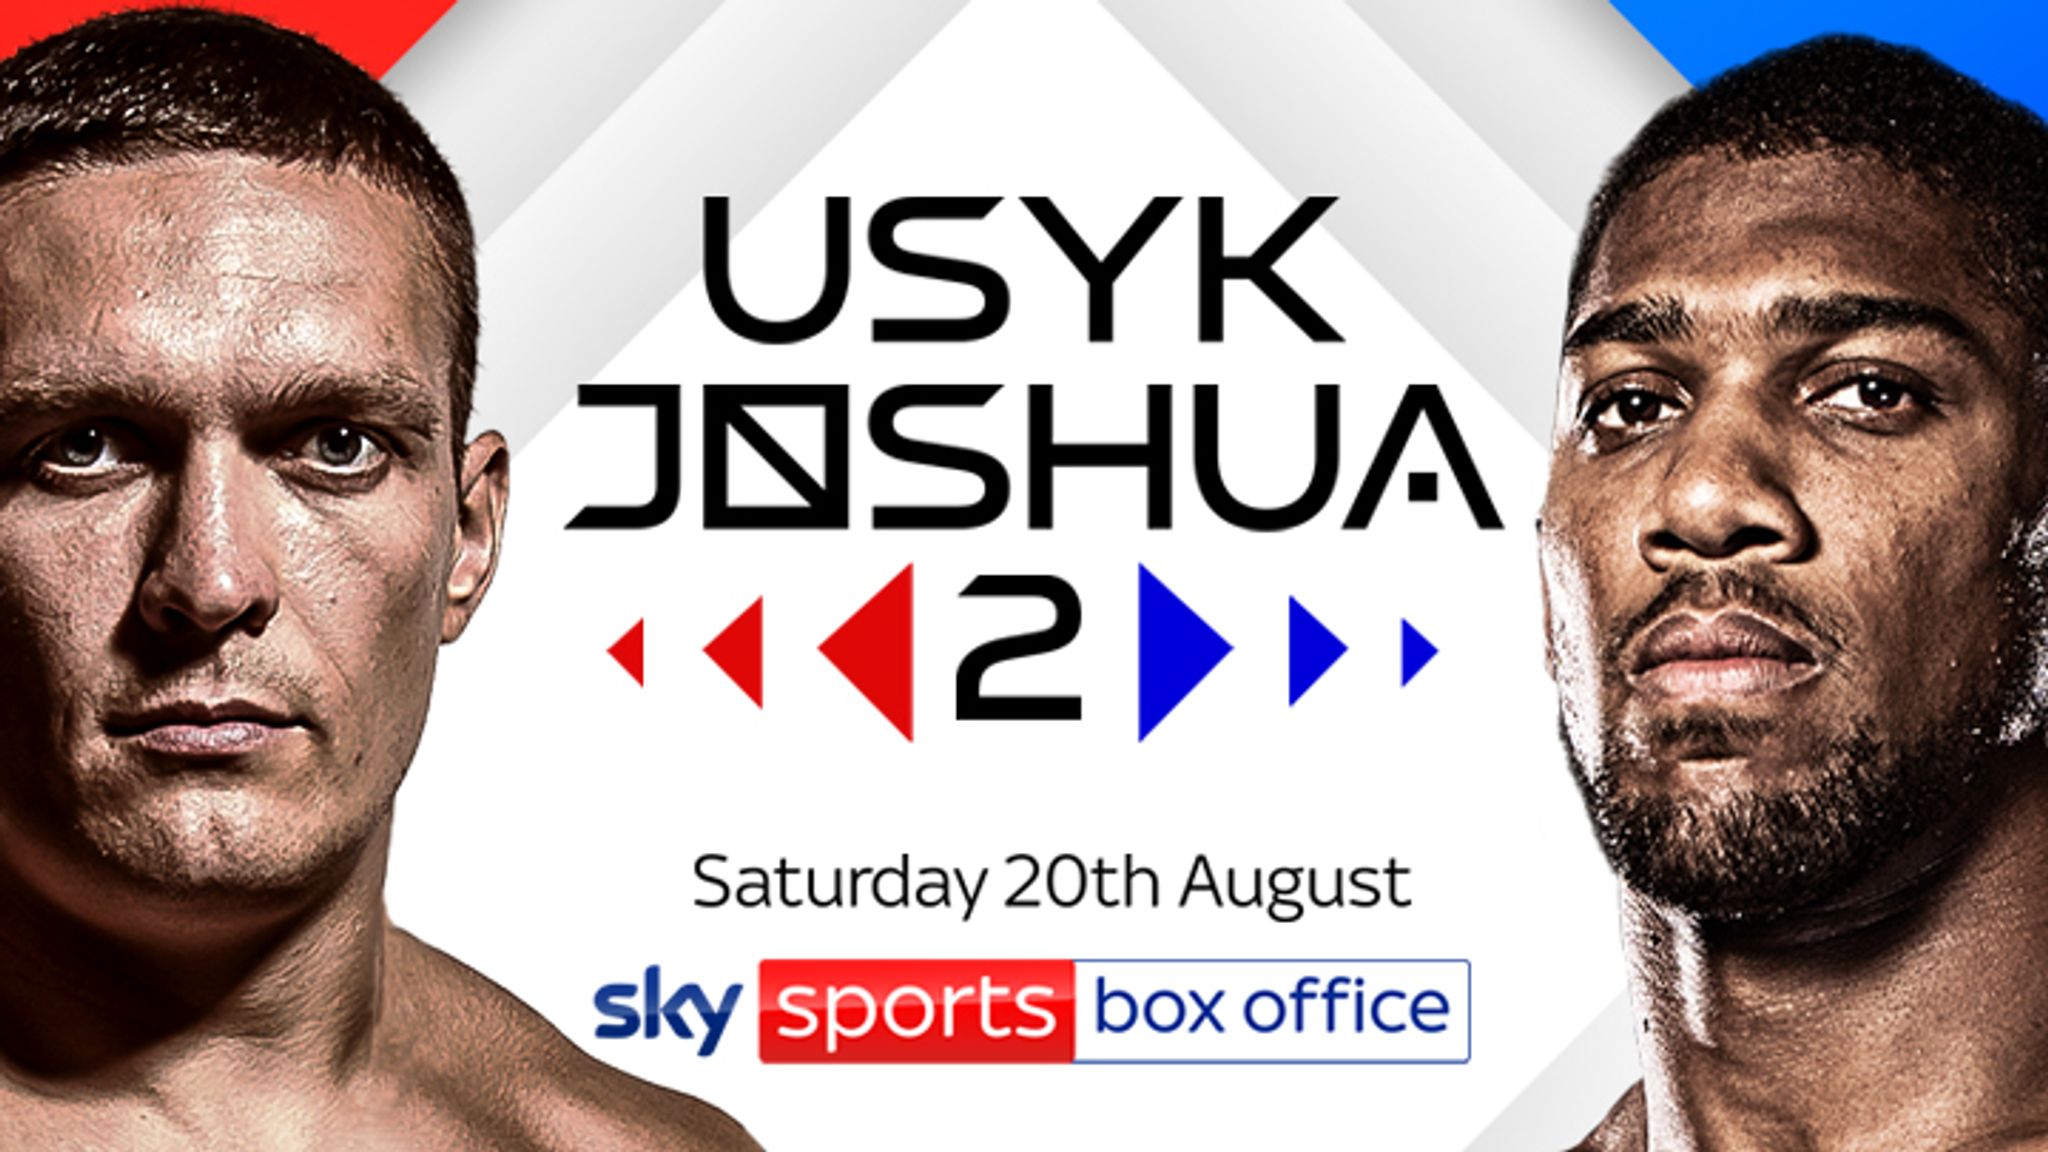 Usyk vs Joshua 2 Timing, pricing, booking details for world heavyweight title rematch on Sky Sports Box Office Boxing News Sky Sports